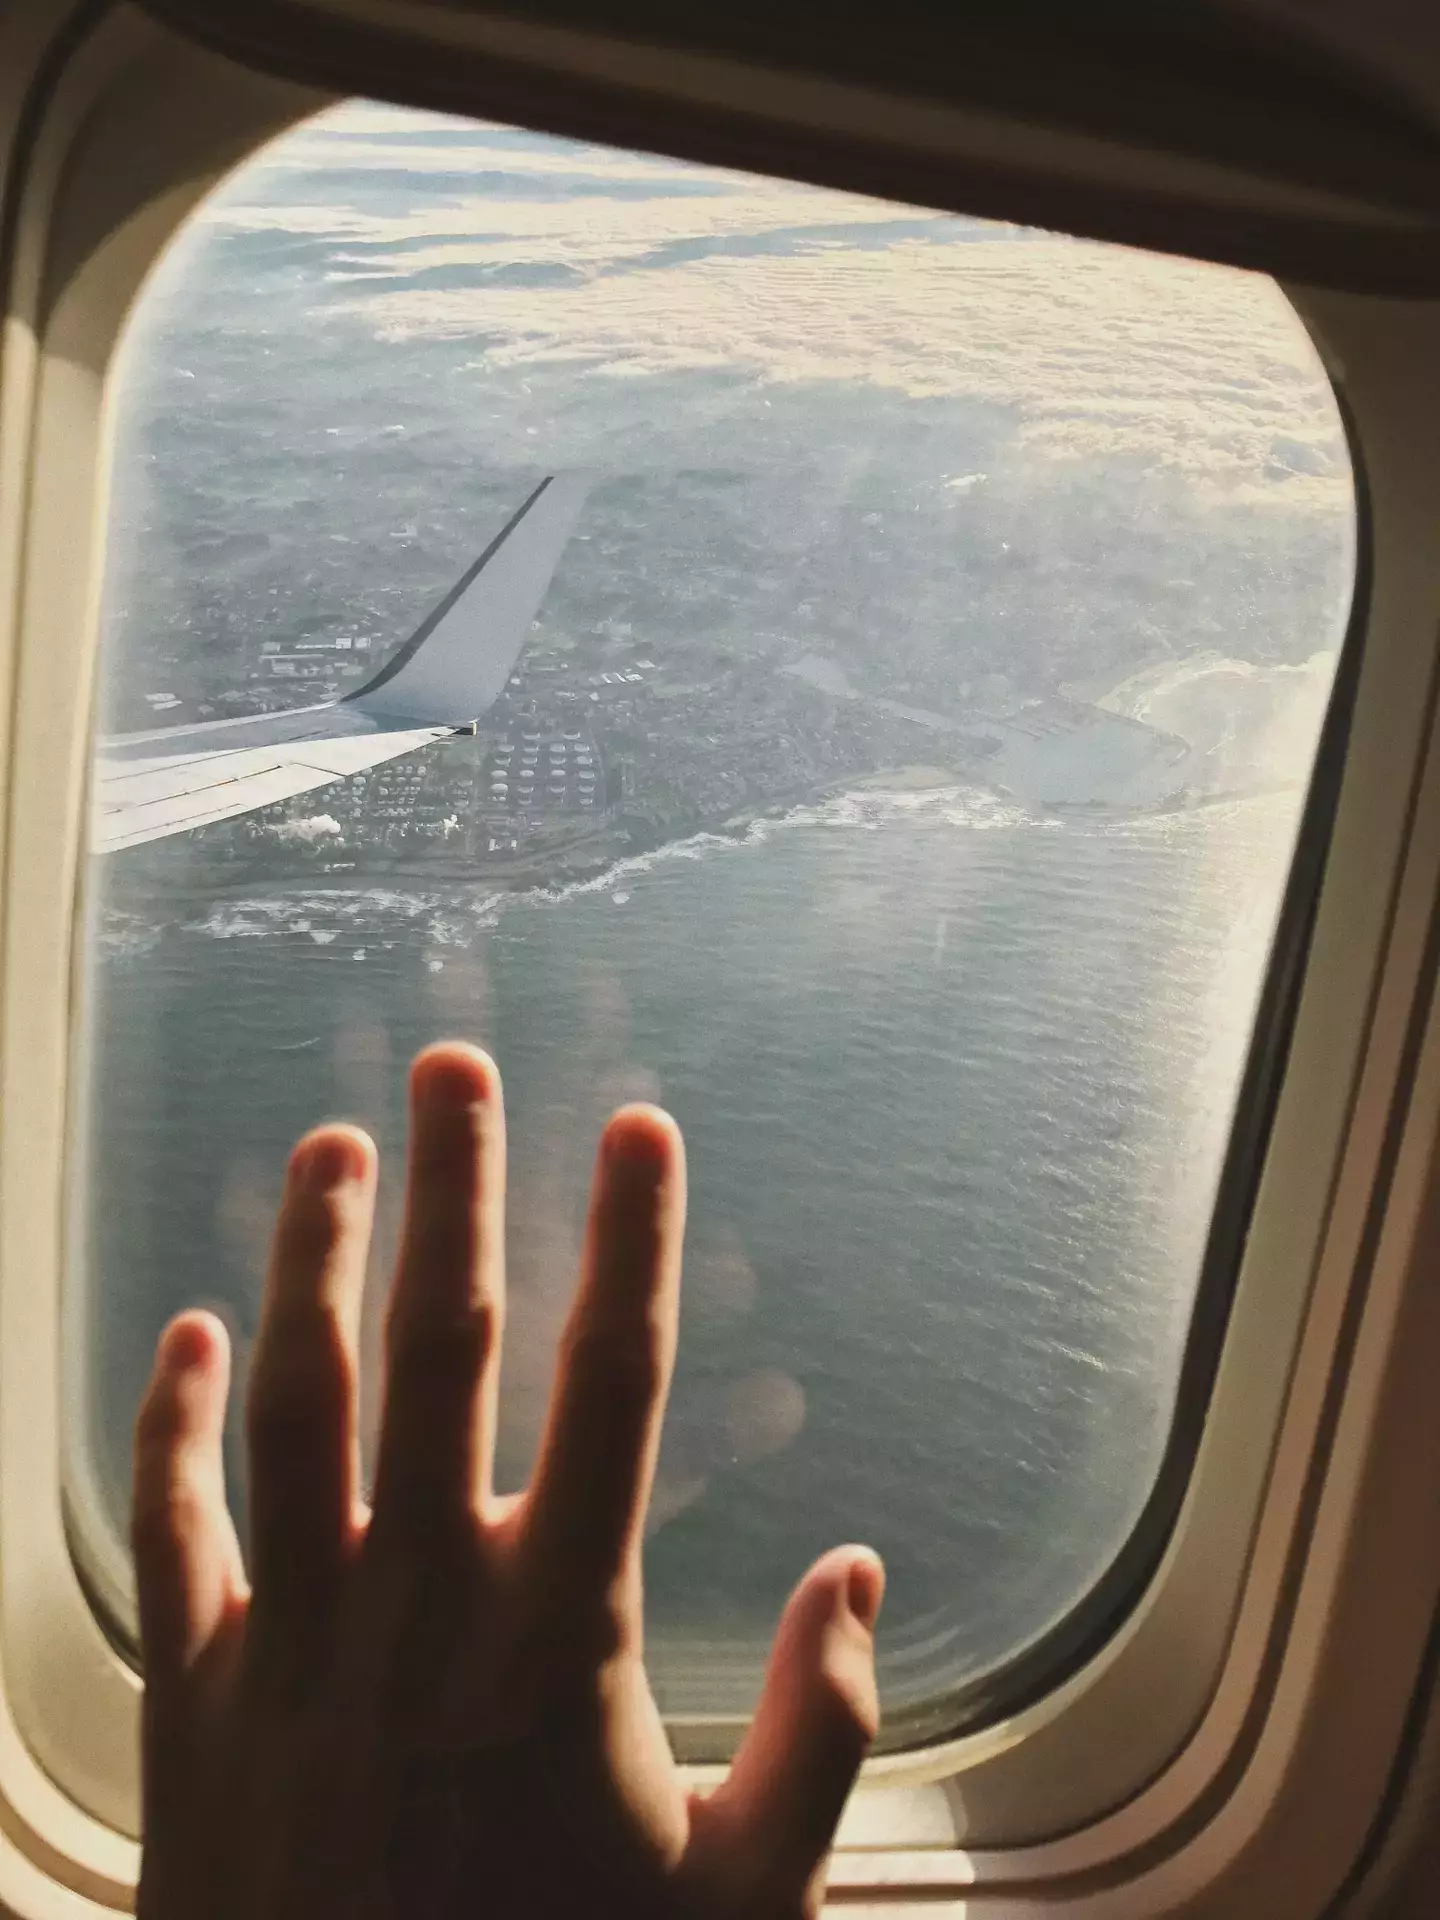 There's a reason why plane windows are round and not square.